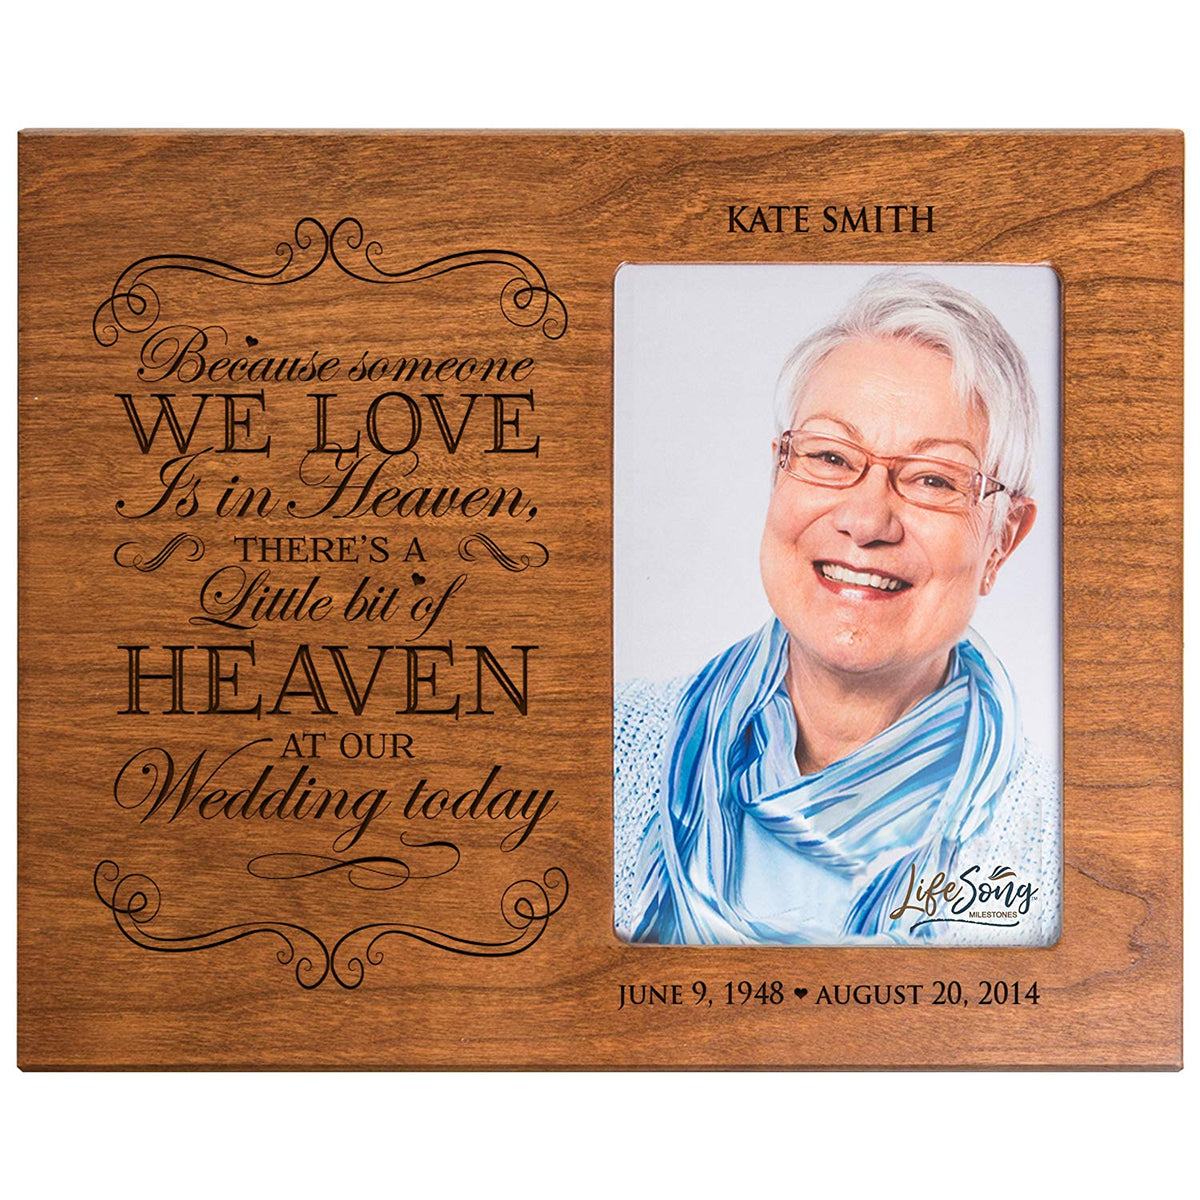 Personalized Wooden Memorial 8x10 Picture Frame holds 4x6 photo Because Someone We Love - LifeSong Milestones